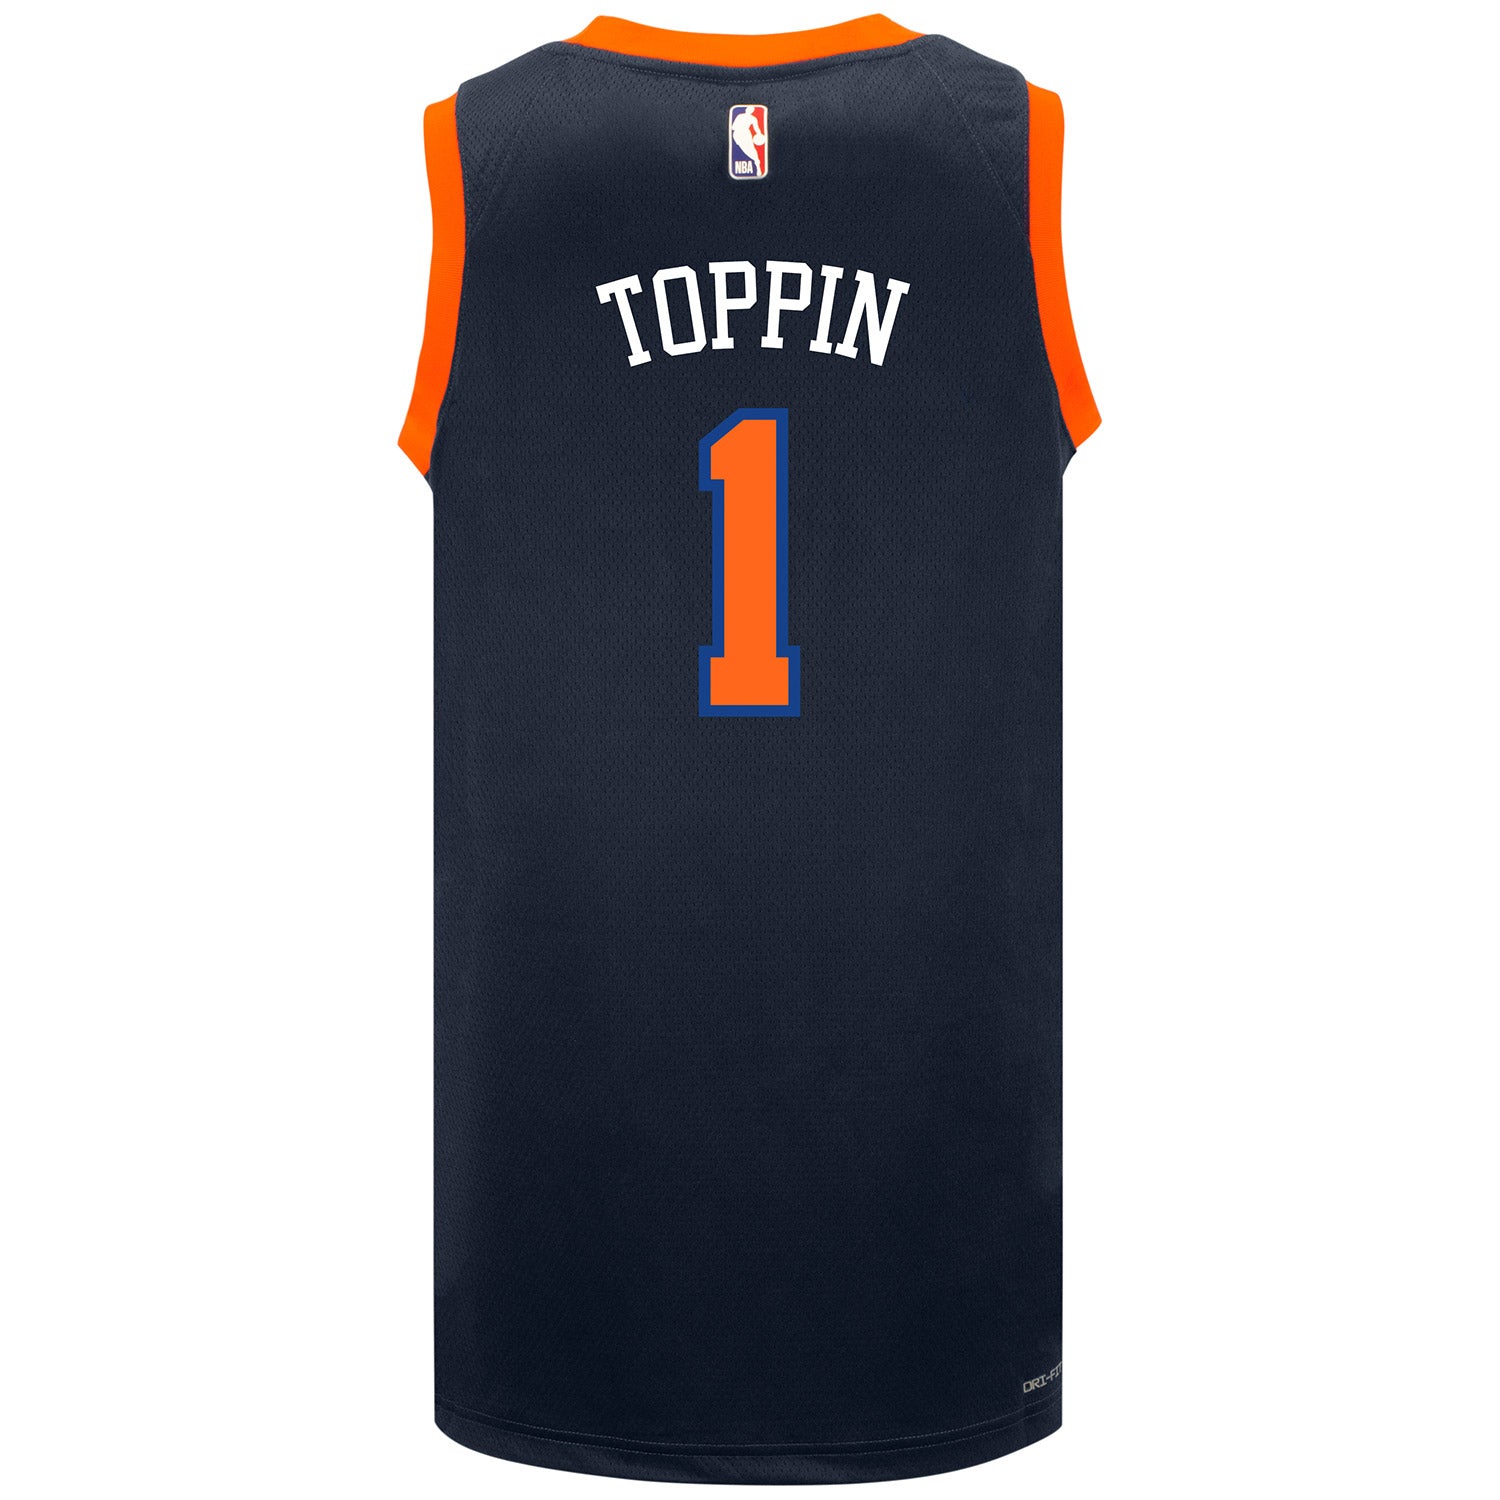 Lot #49: Autographed Obi Toppin Jersey